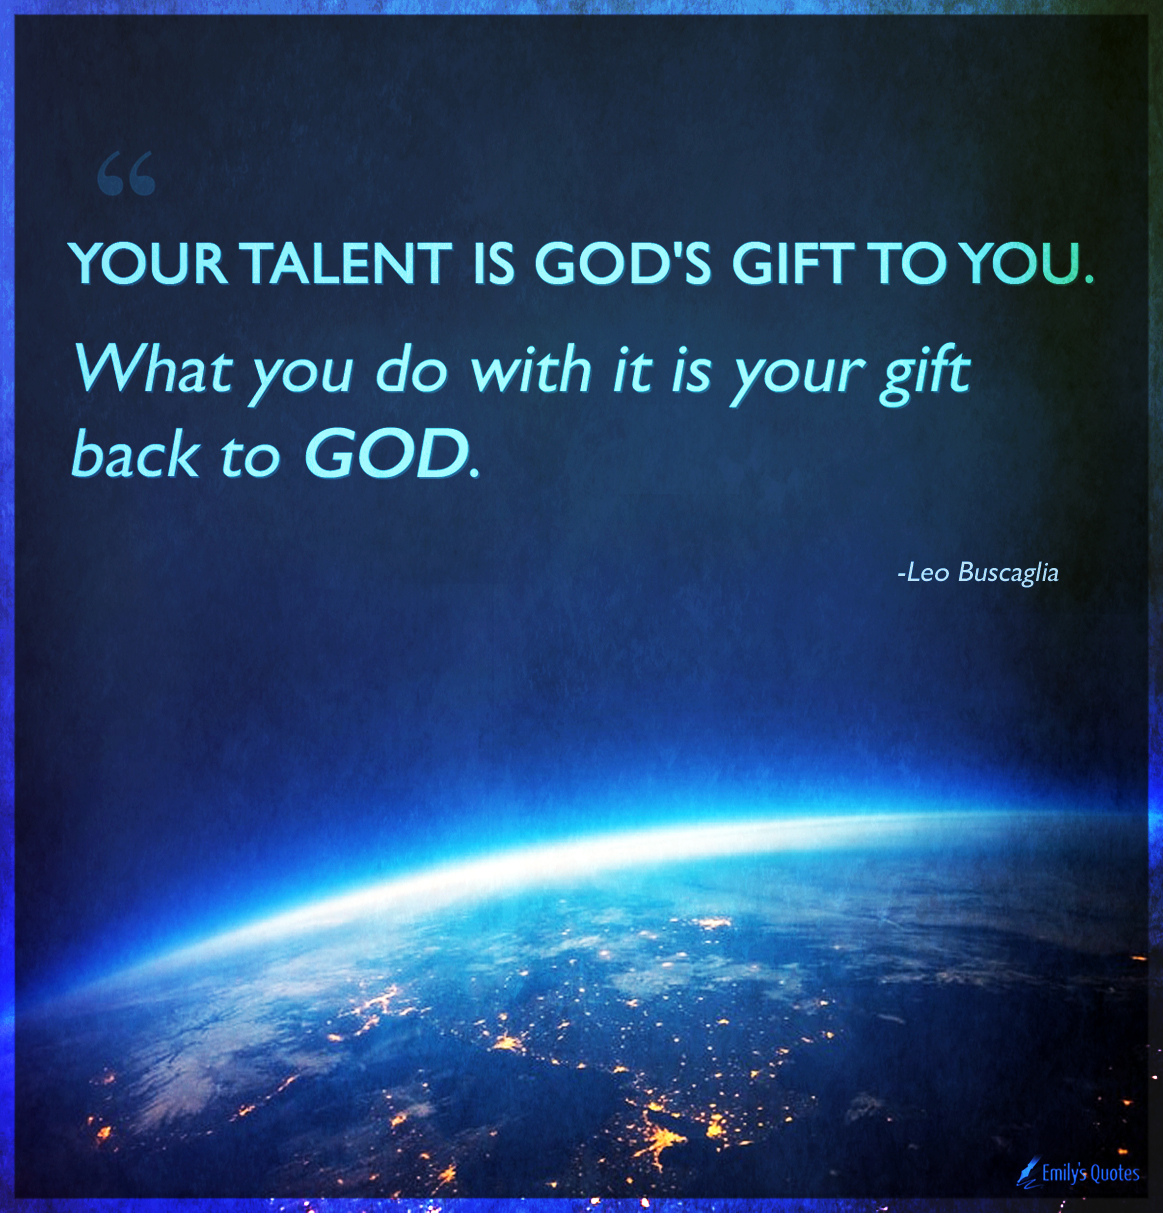 Your talent is God’s gift to you. What you do with it is your gift back to God